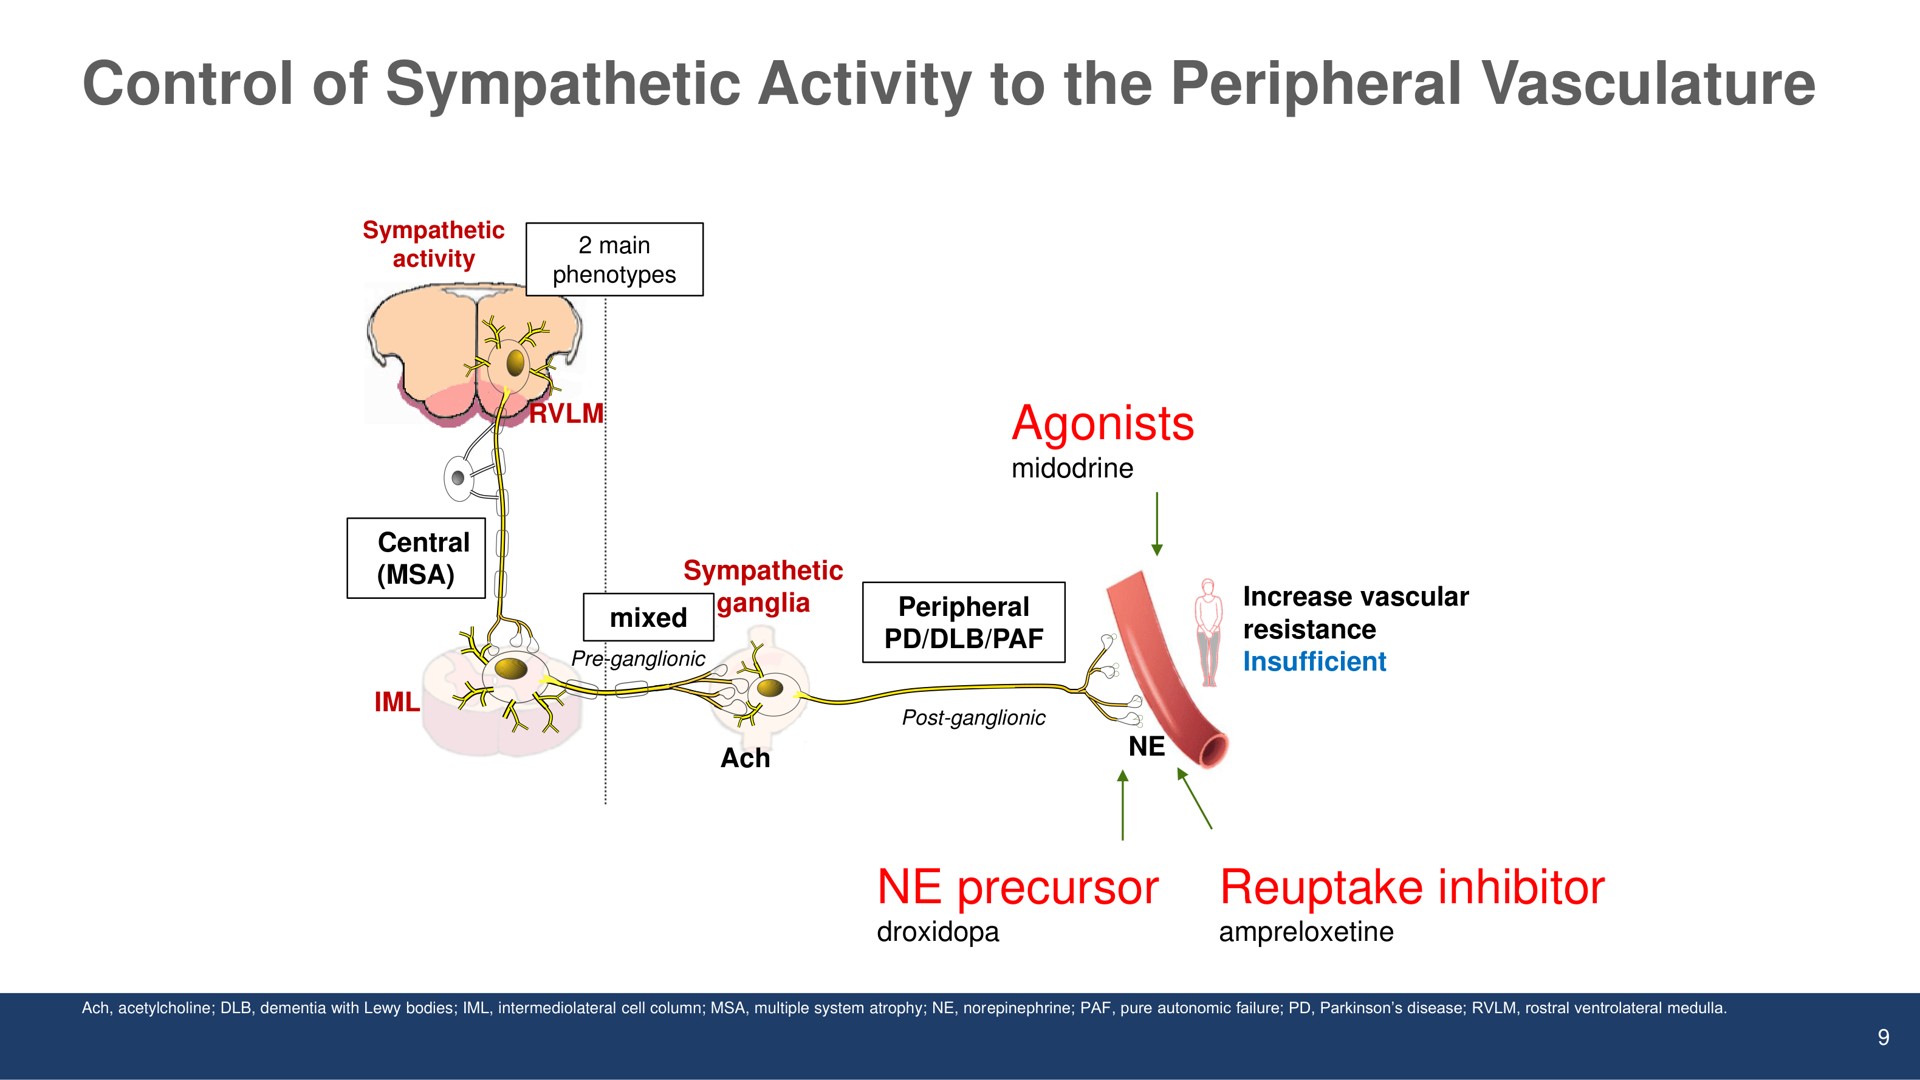 control of sympathetic activity to the peripheral vasculature | Theravance Biopharma